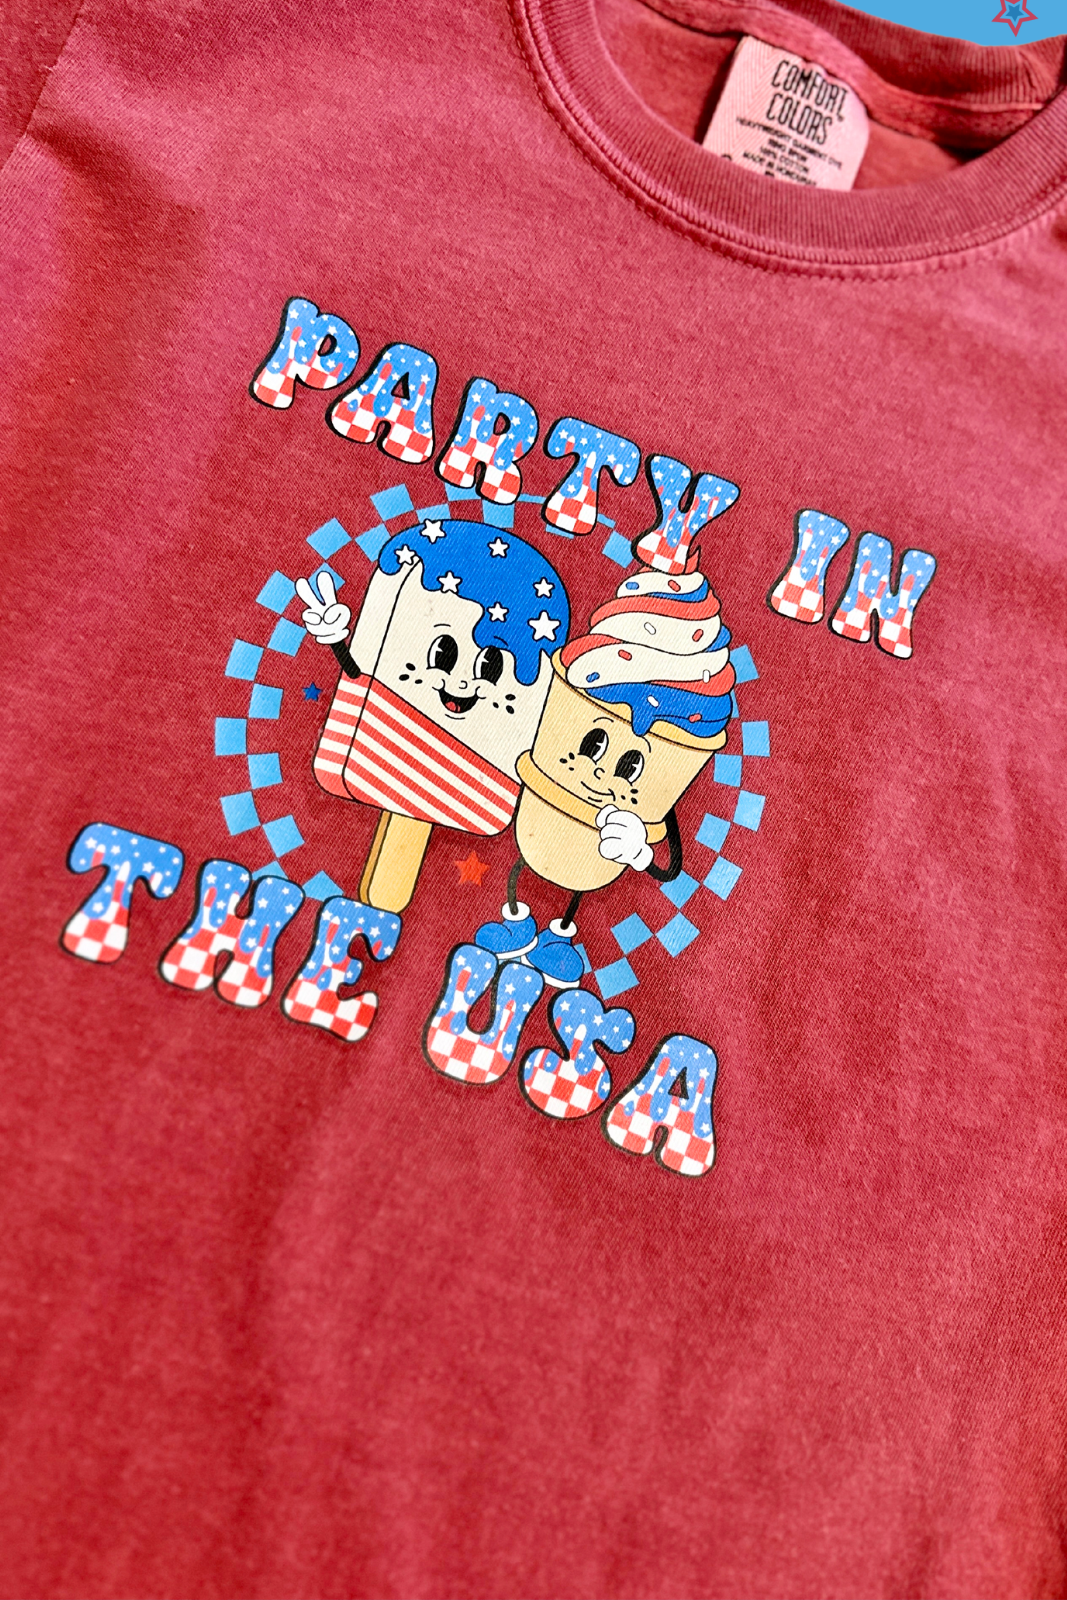 Party In the USA Tee for Women